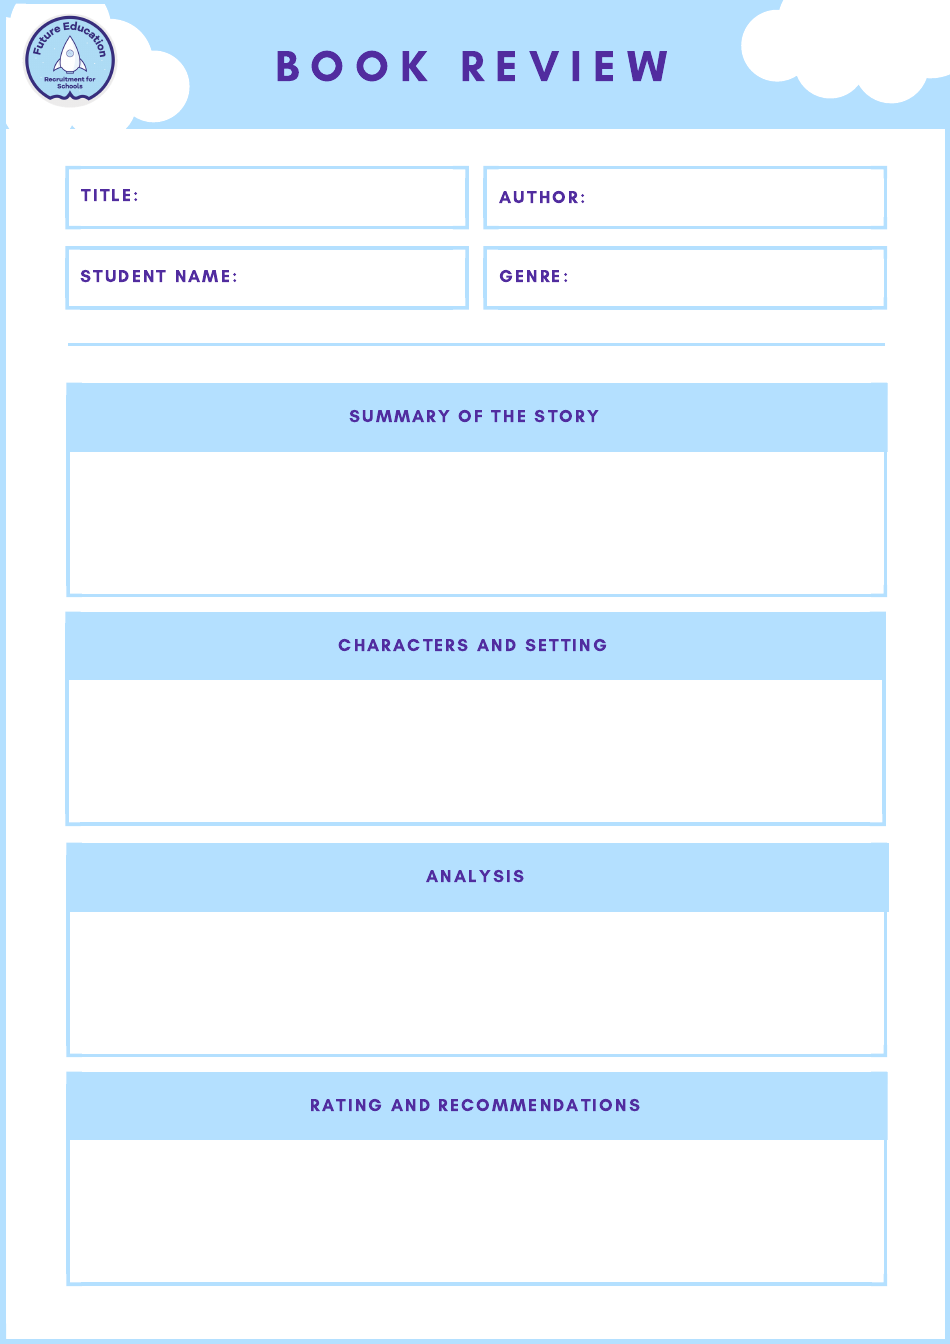 Book Review Template - Blue Sky, Page 1